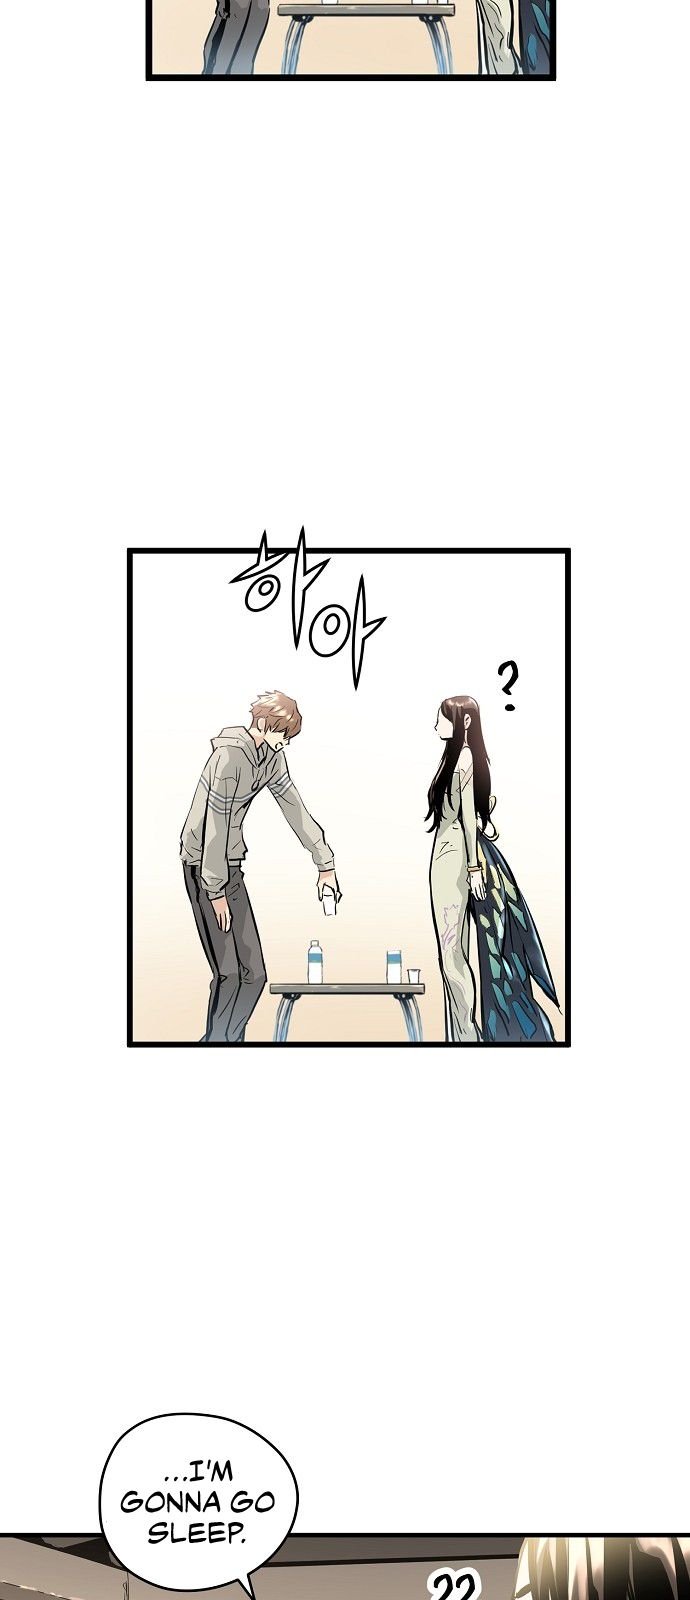 Read Manga PROMISED ORCHID - Chapter 41